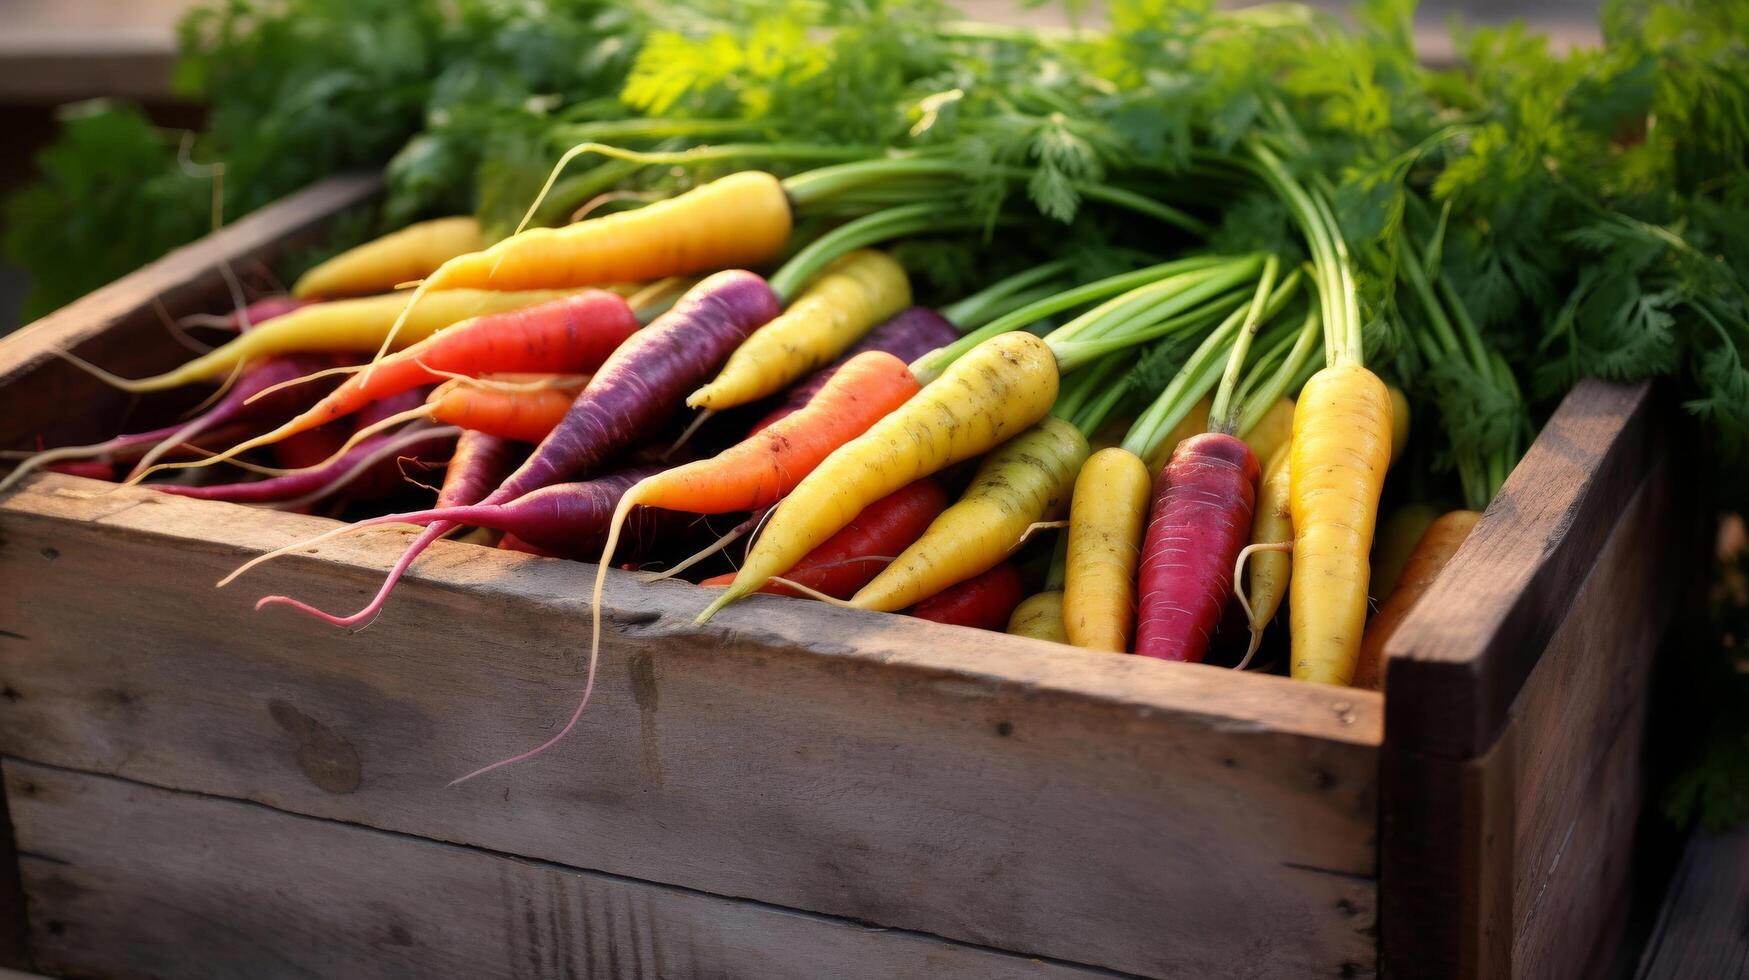 Rainbow carrots in weathered crate photo